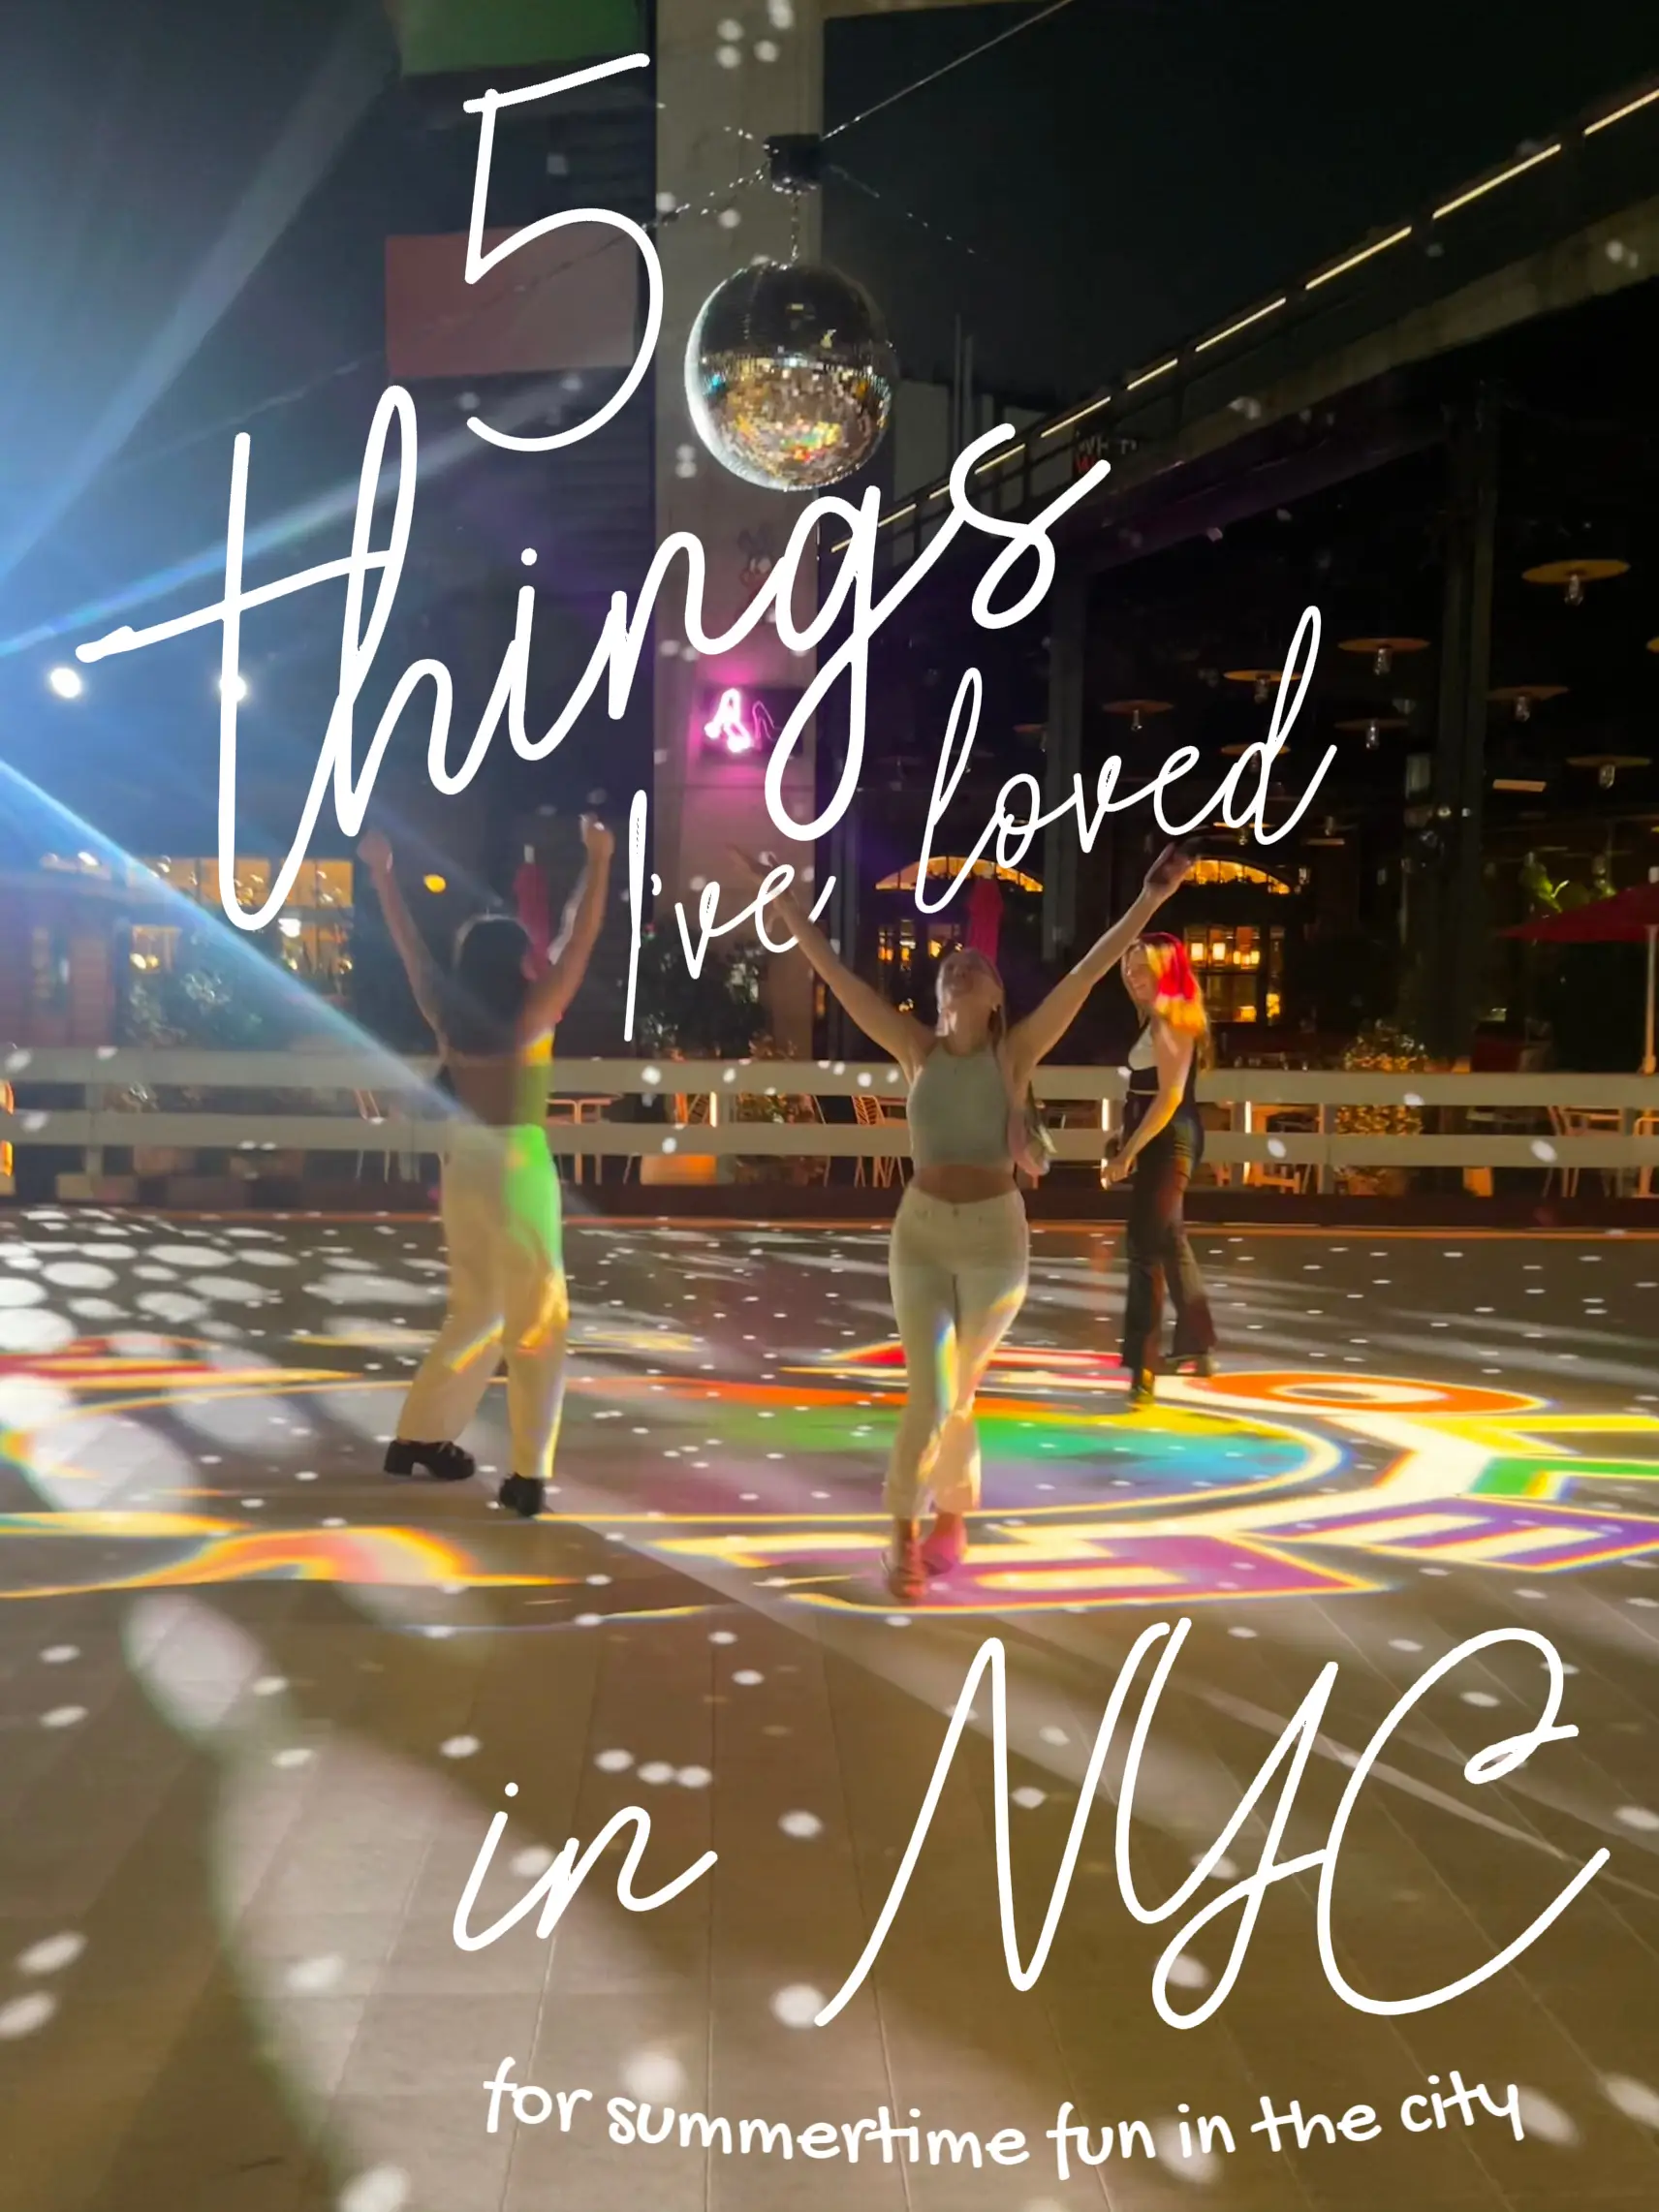  Five women are standing in a room with a disco table and a light table. They are wearing tops and are smiling. The words "Things We Love" are displayed above them.